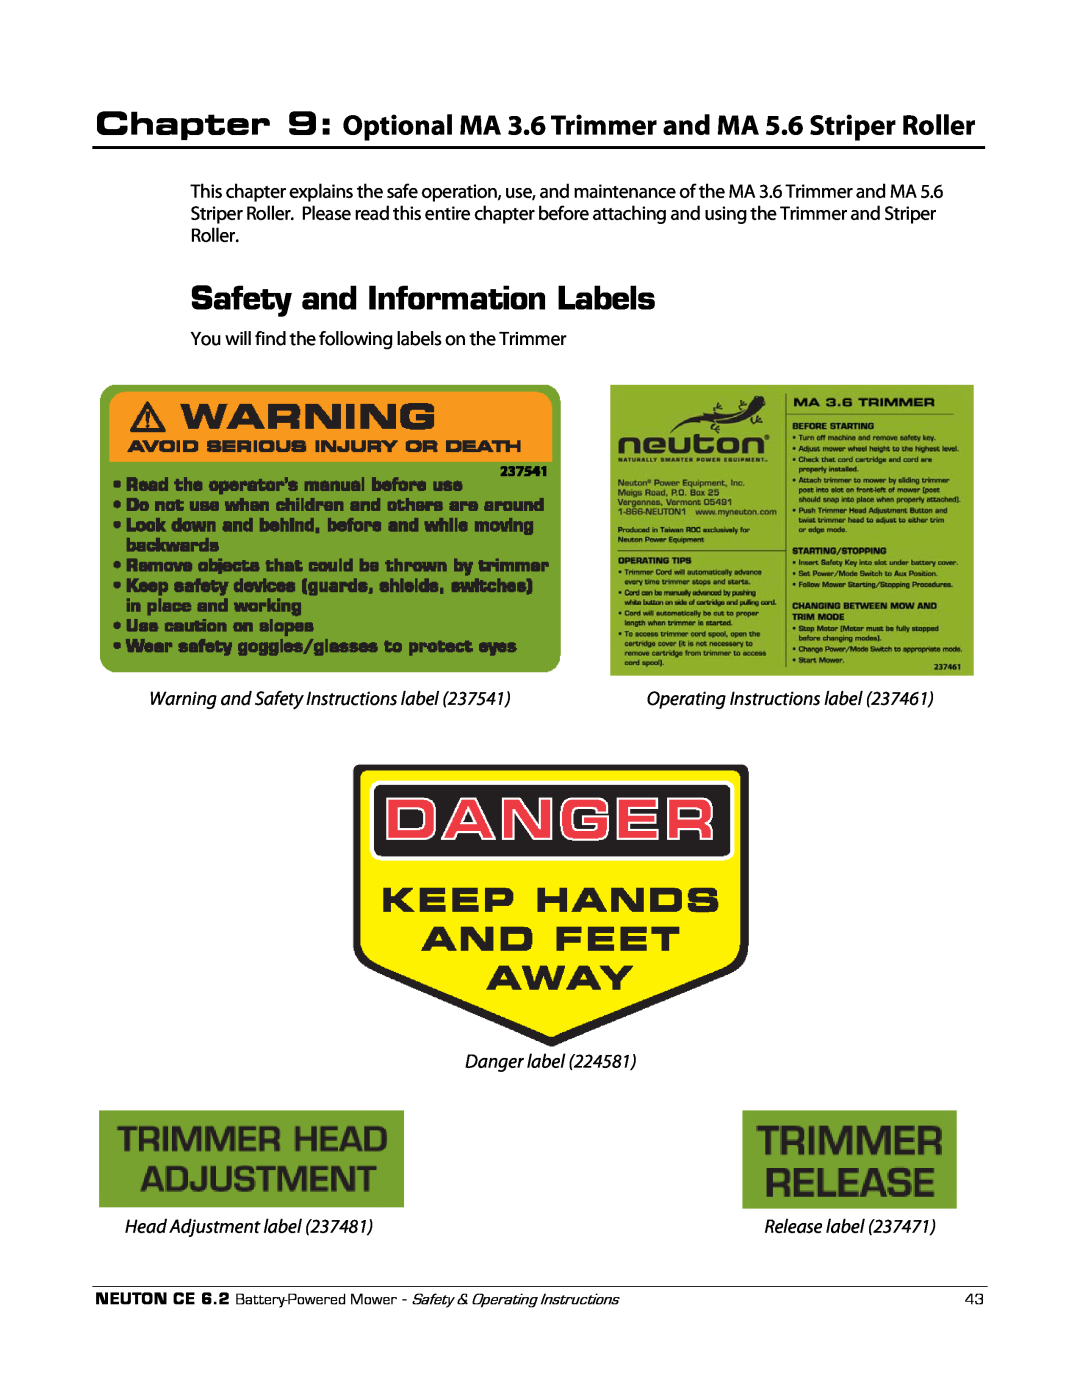 Neuton CE 6.2 Warning and Safety Instructions label, Danger label, Head Adjustment label, Safety and Information Labels 